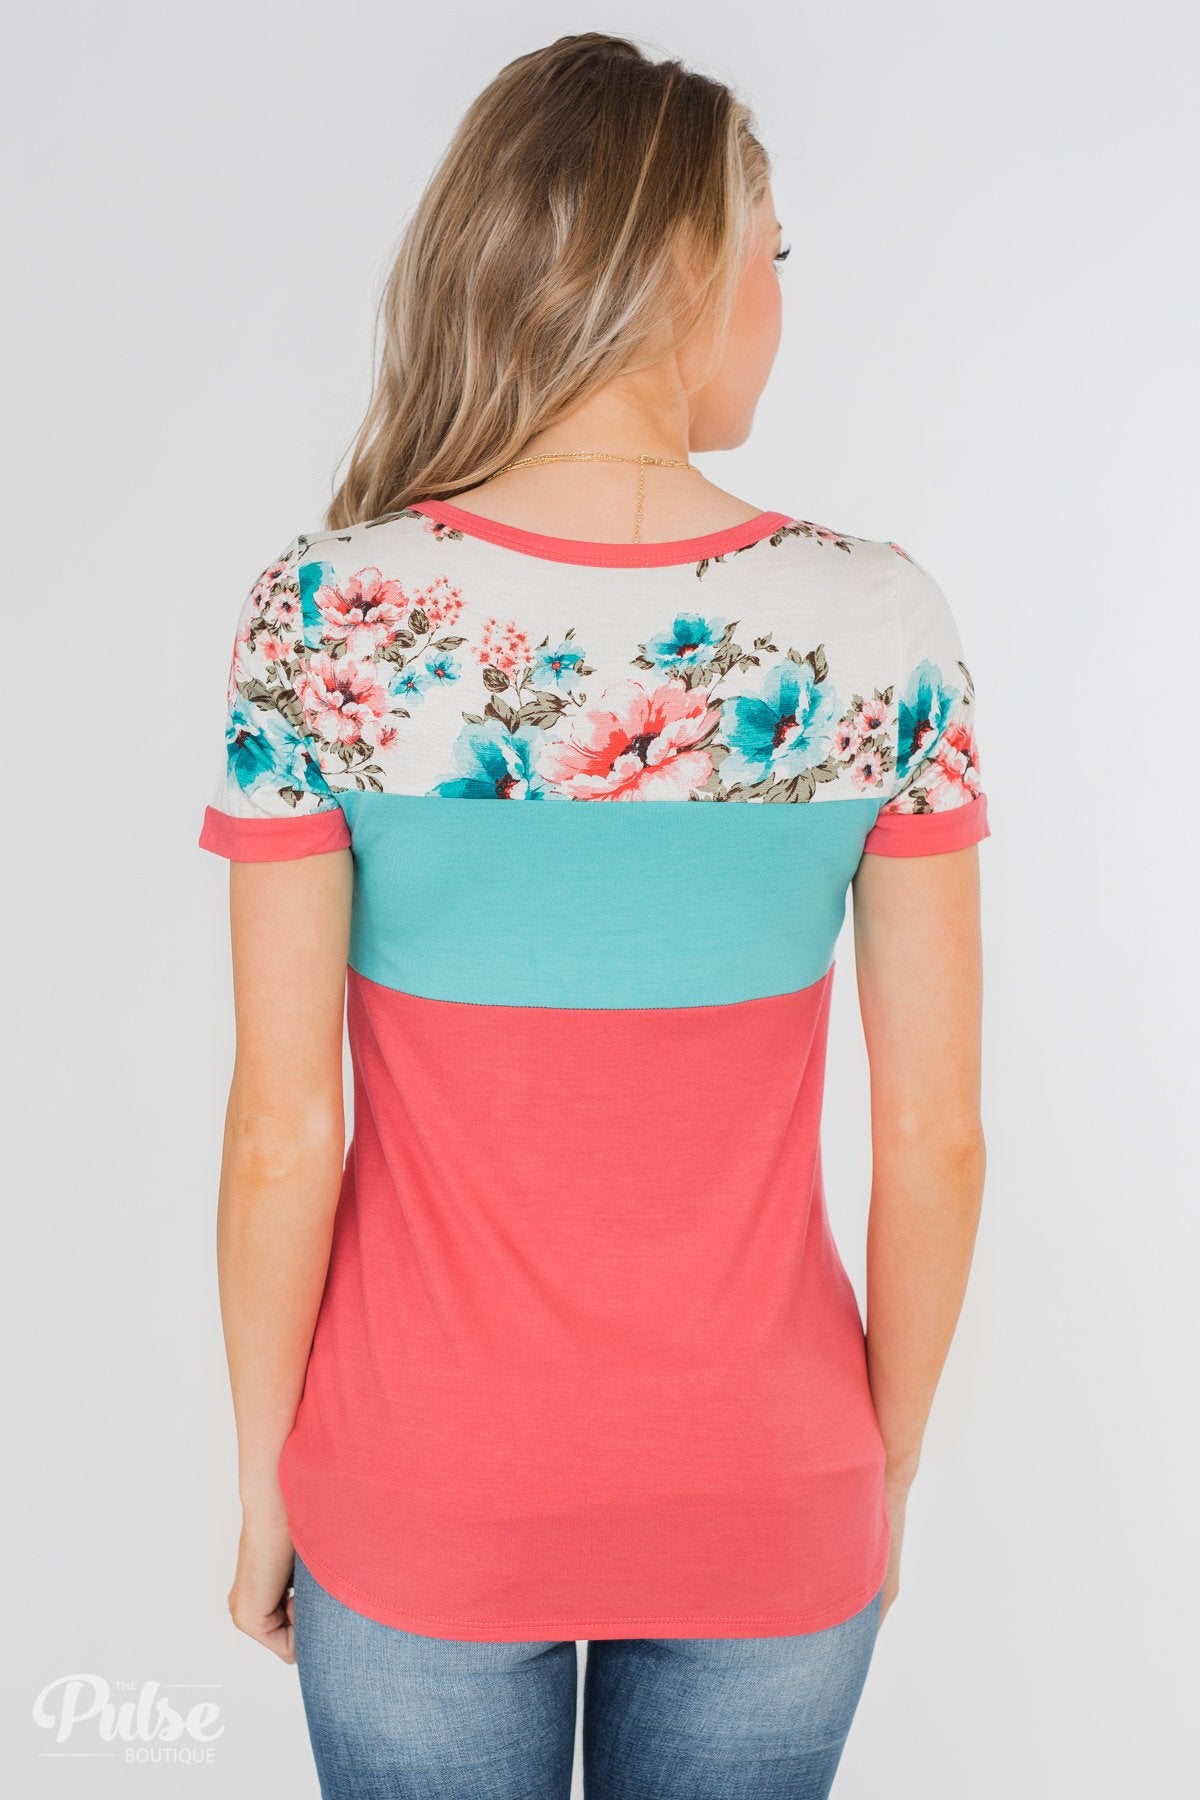 Illuminate The Room Floral Color Block Top- Dark Pink & Ivory